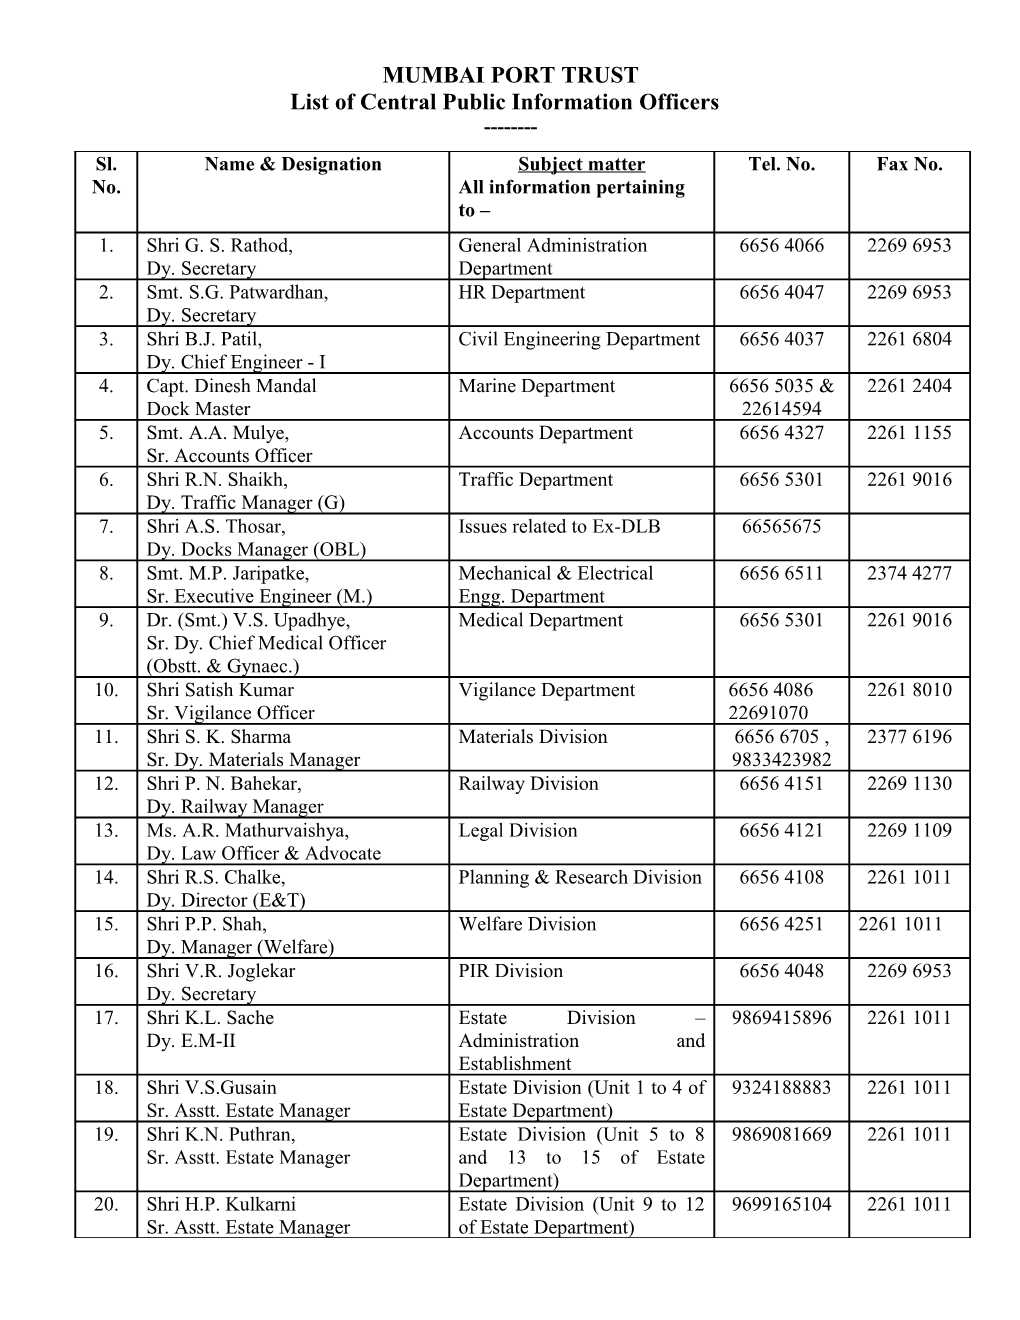 List of Central Public Information Officers